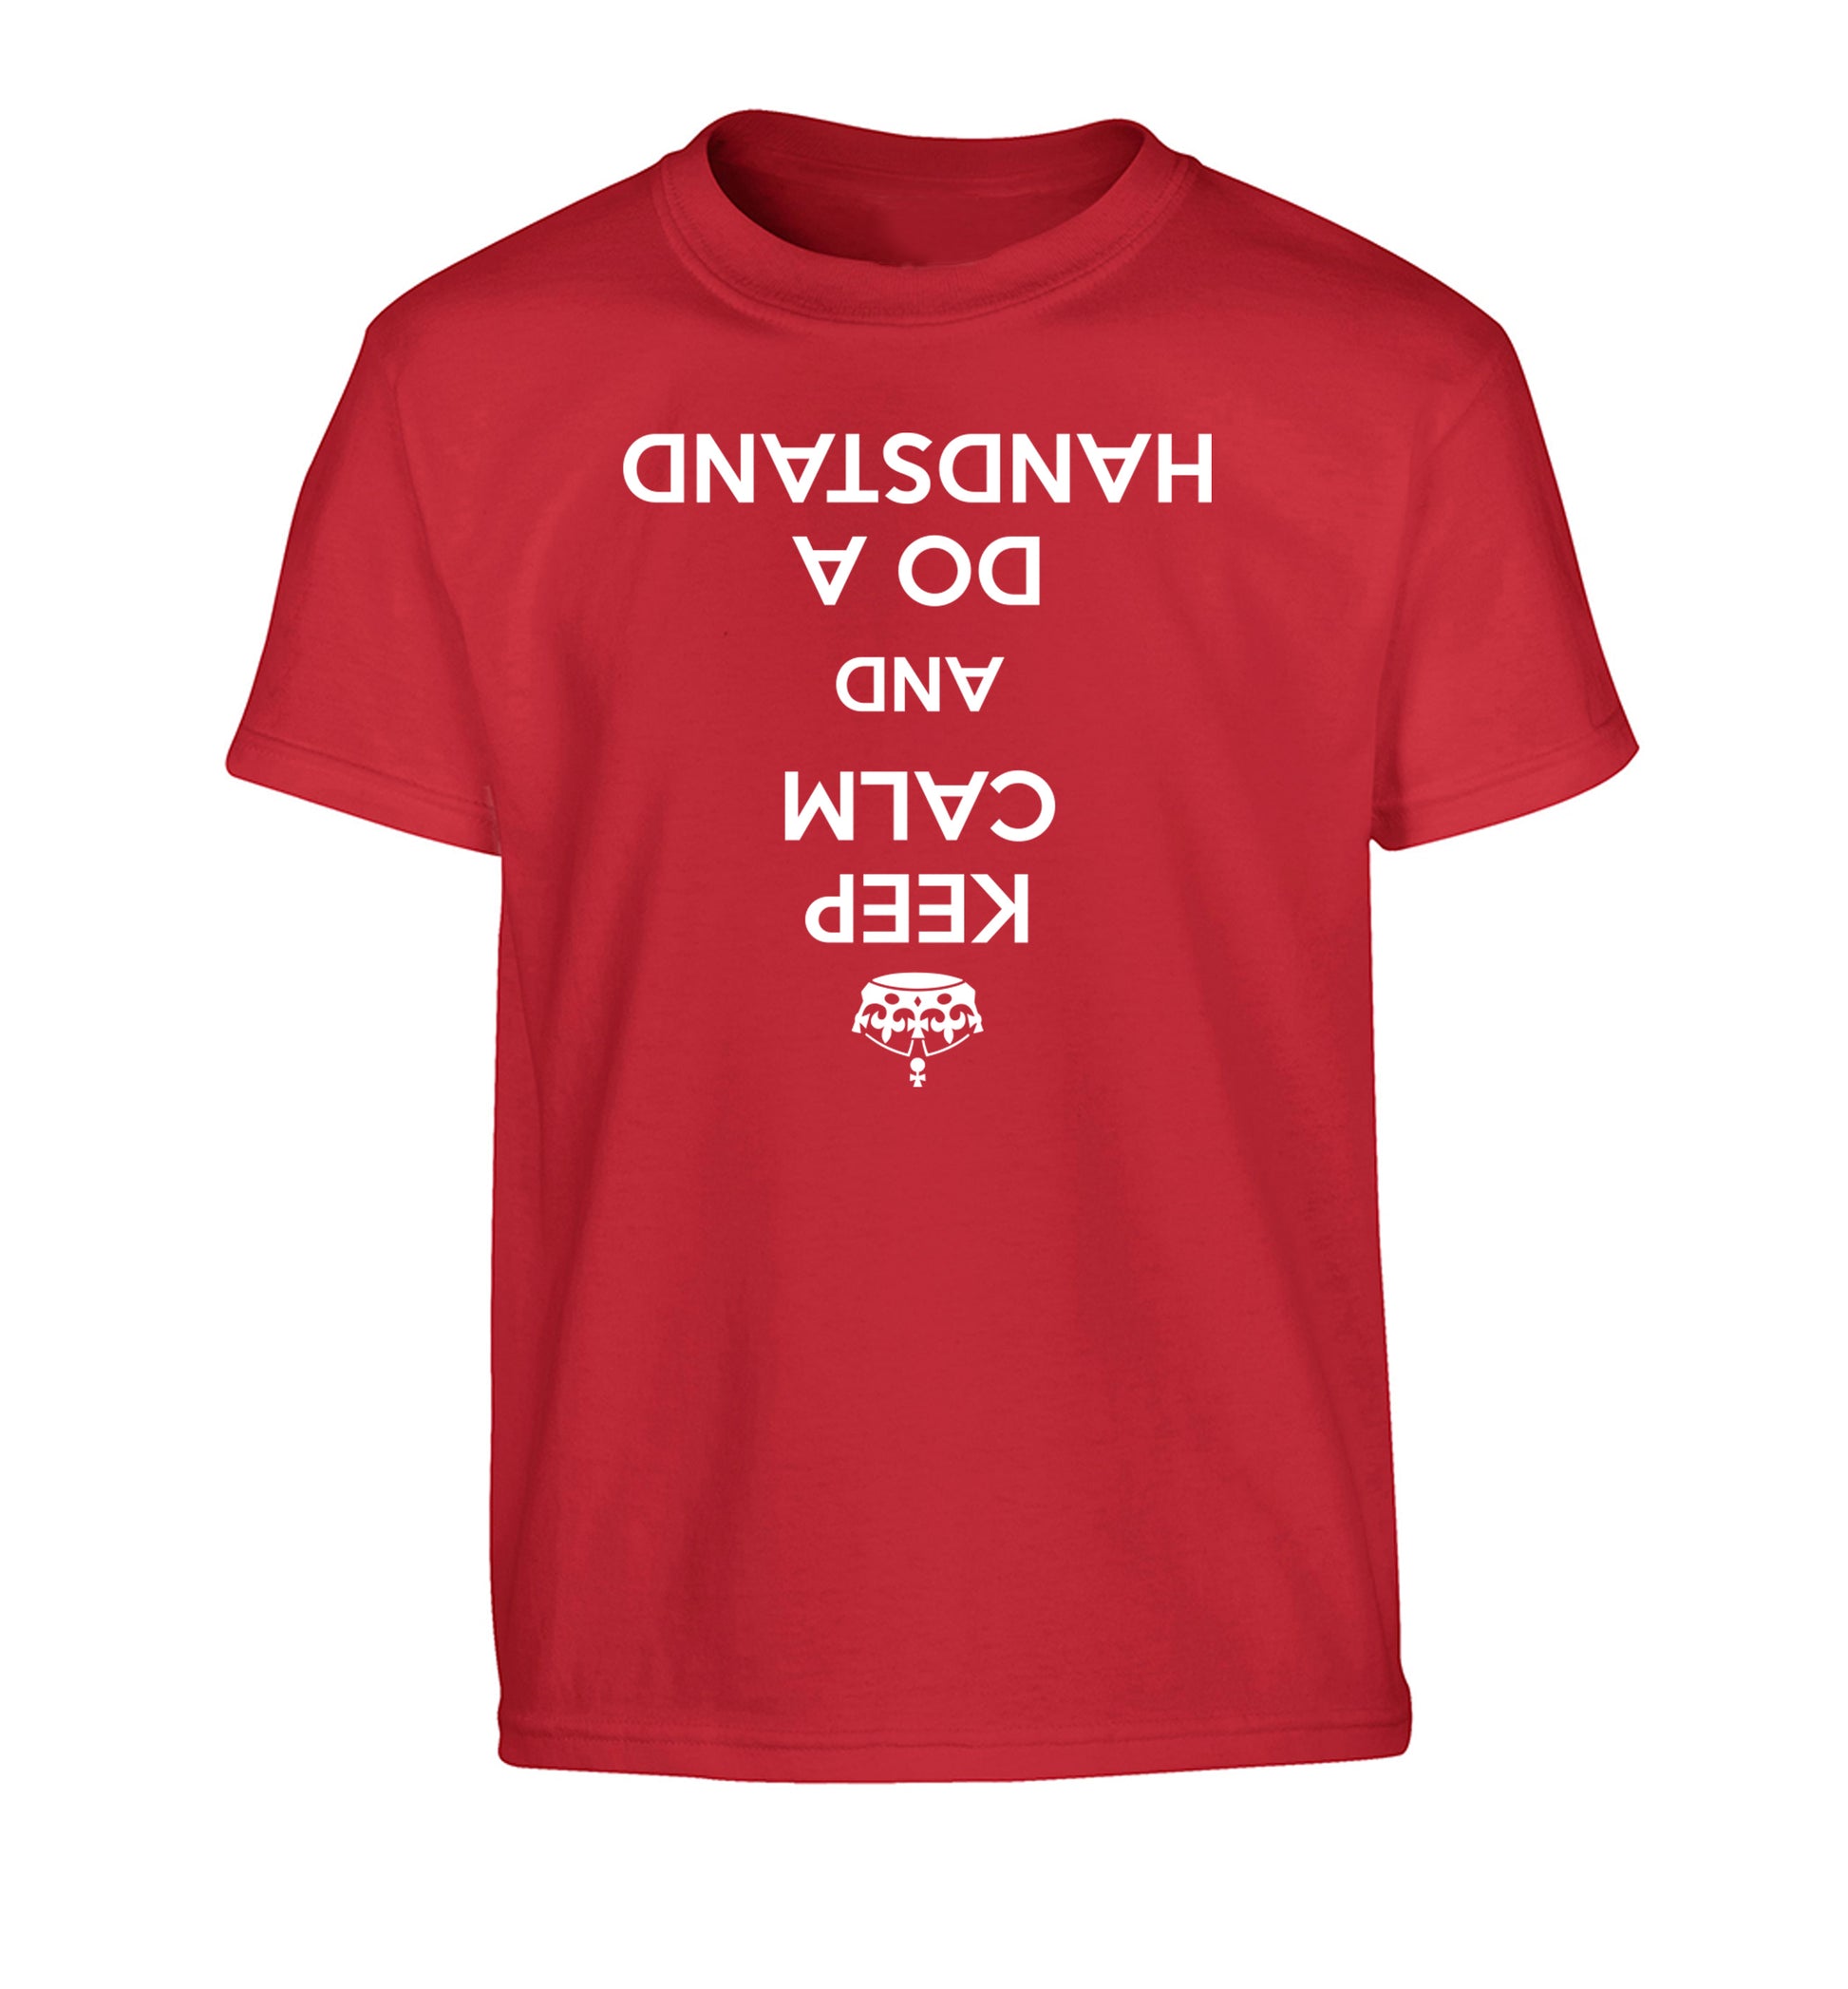 Keep calm and do a handstand Children's red Tshirt 12-13 Years